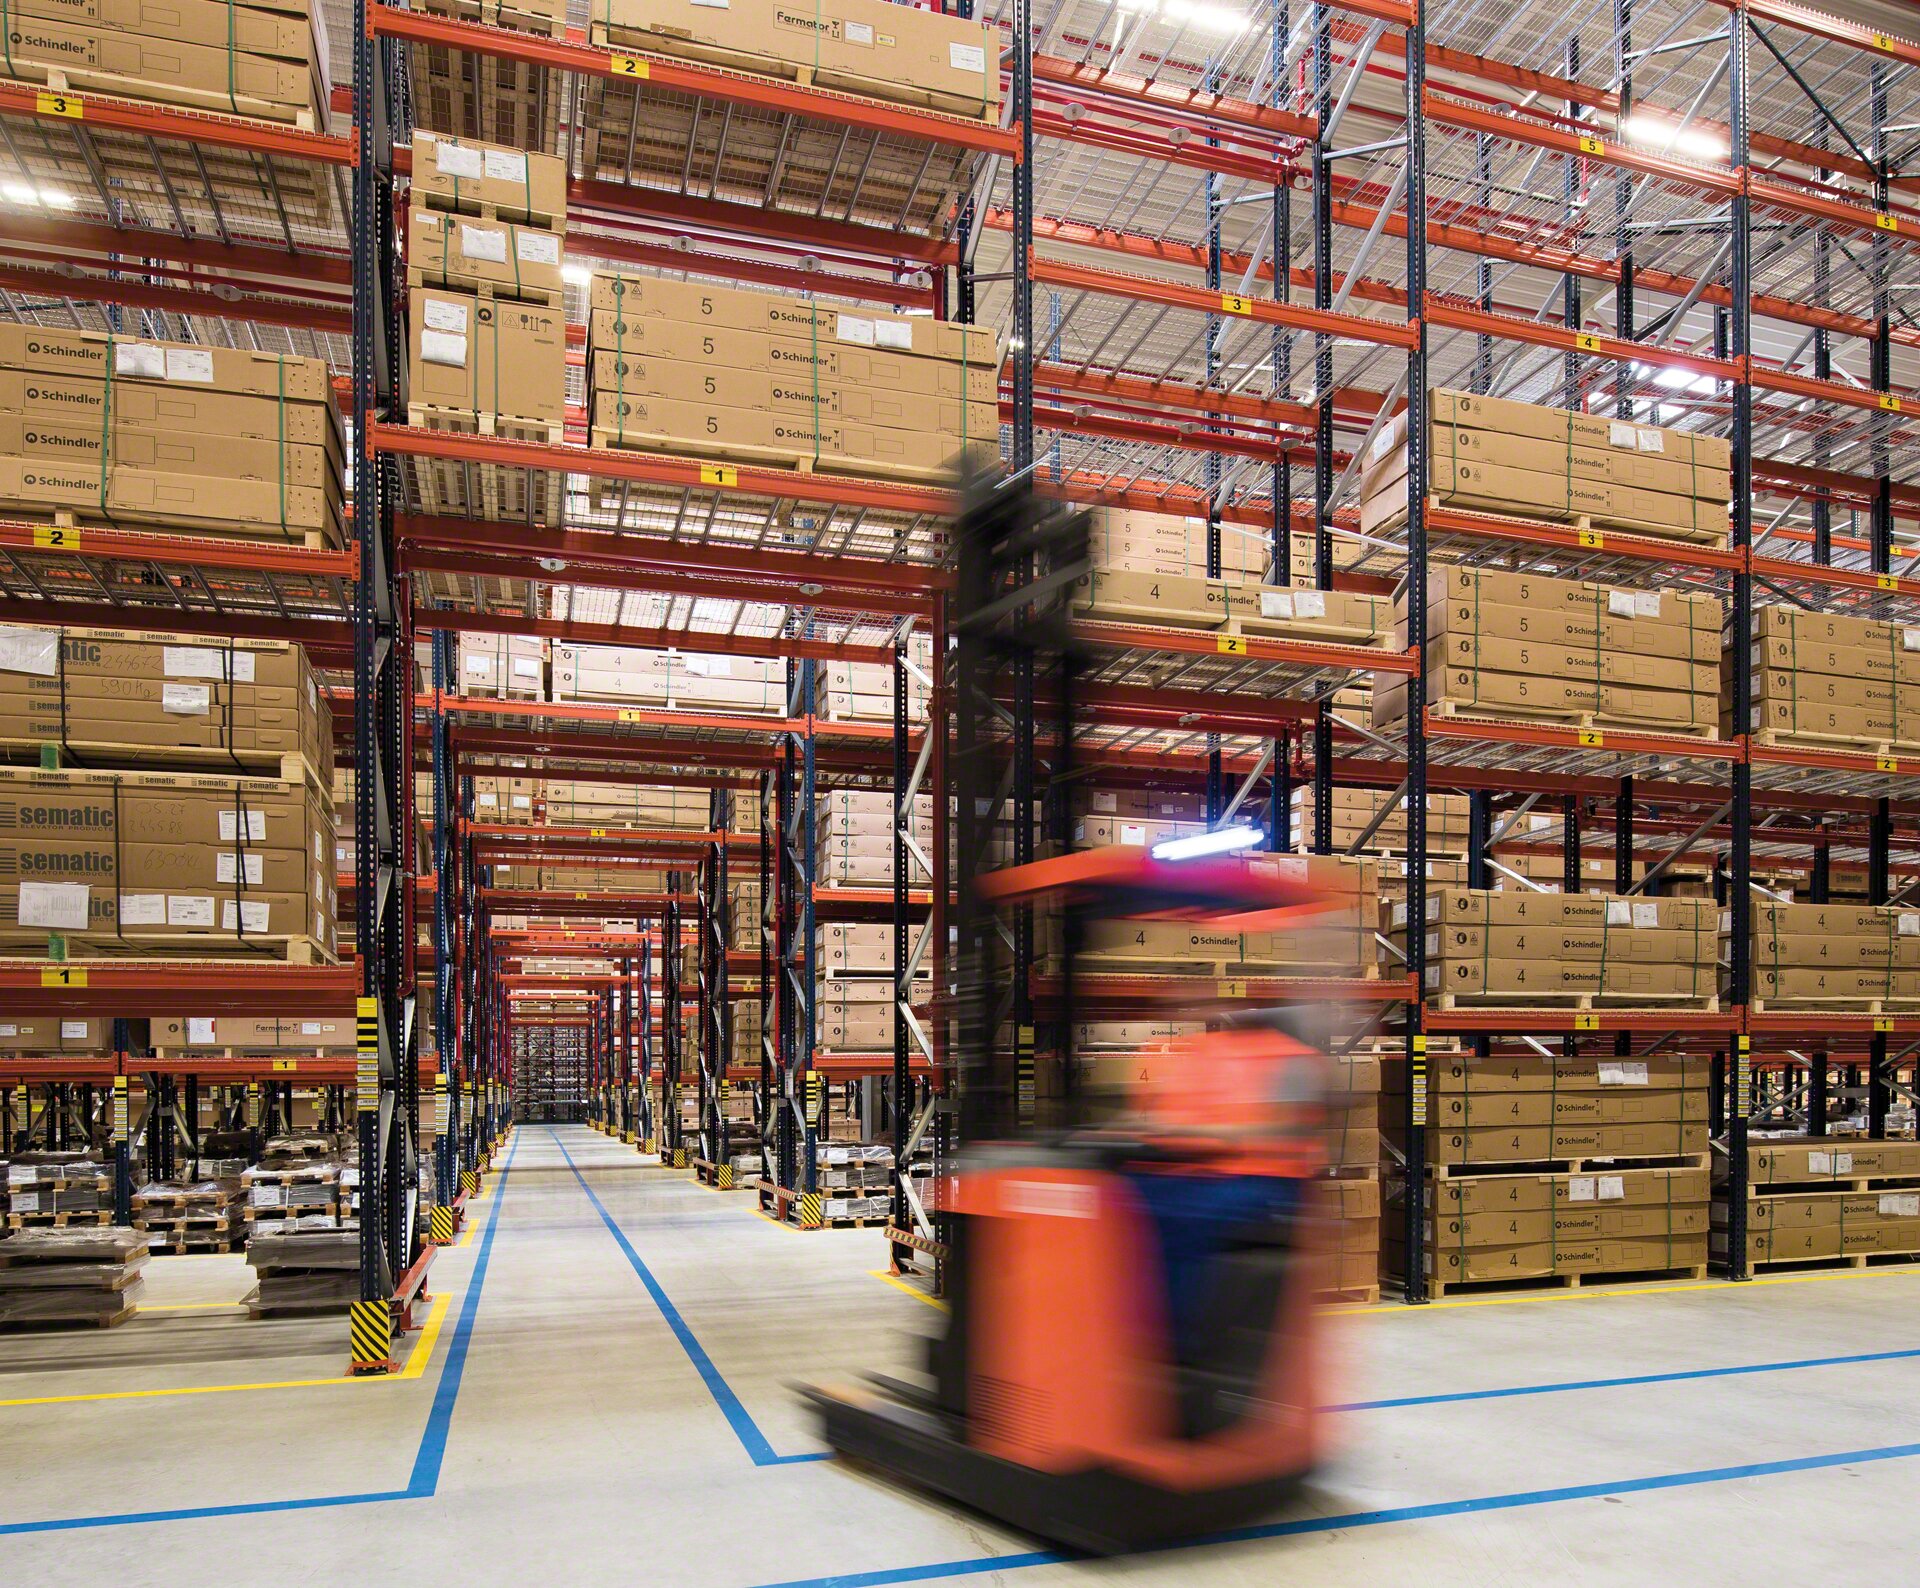 Ground-level passageways allow forklift operators to drive through the pallet racking